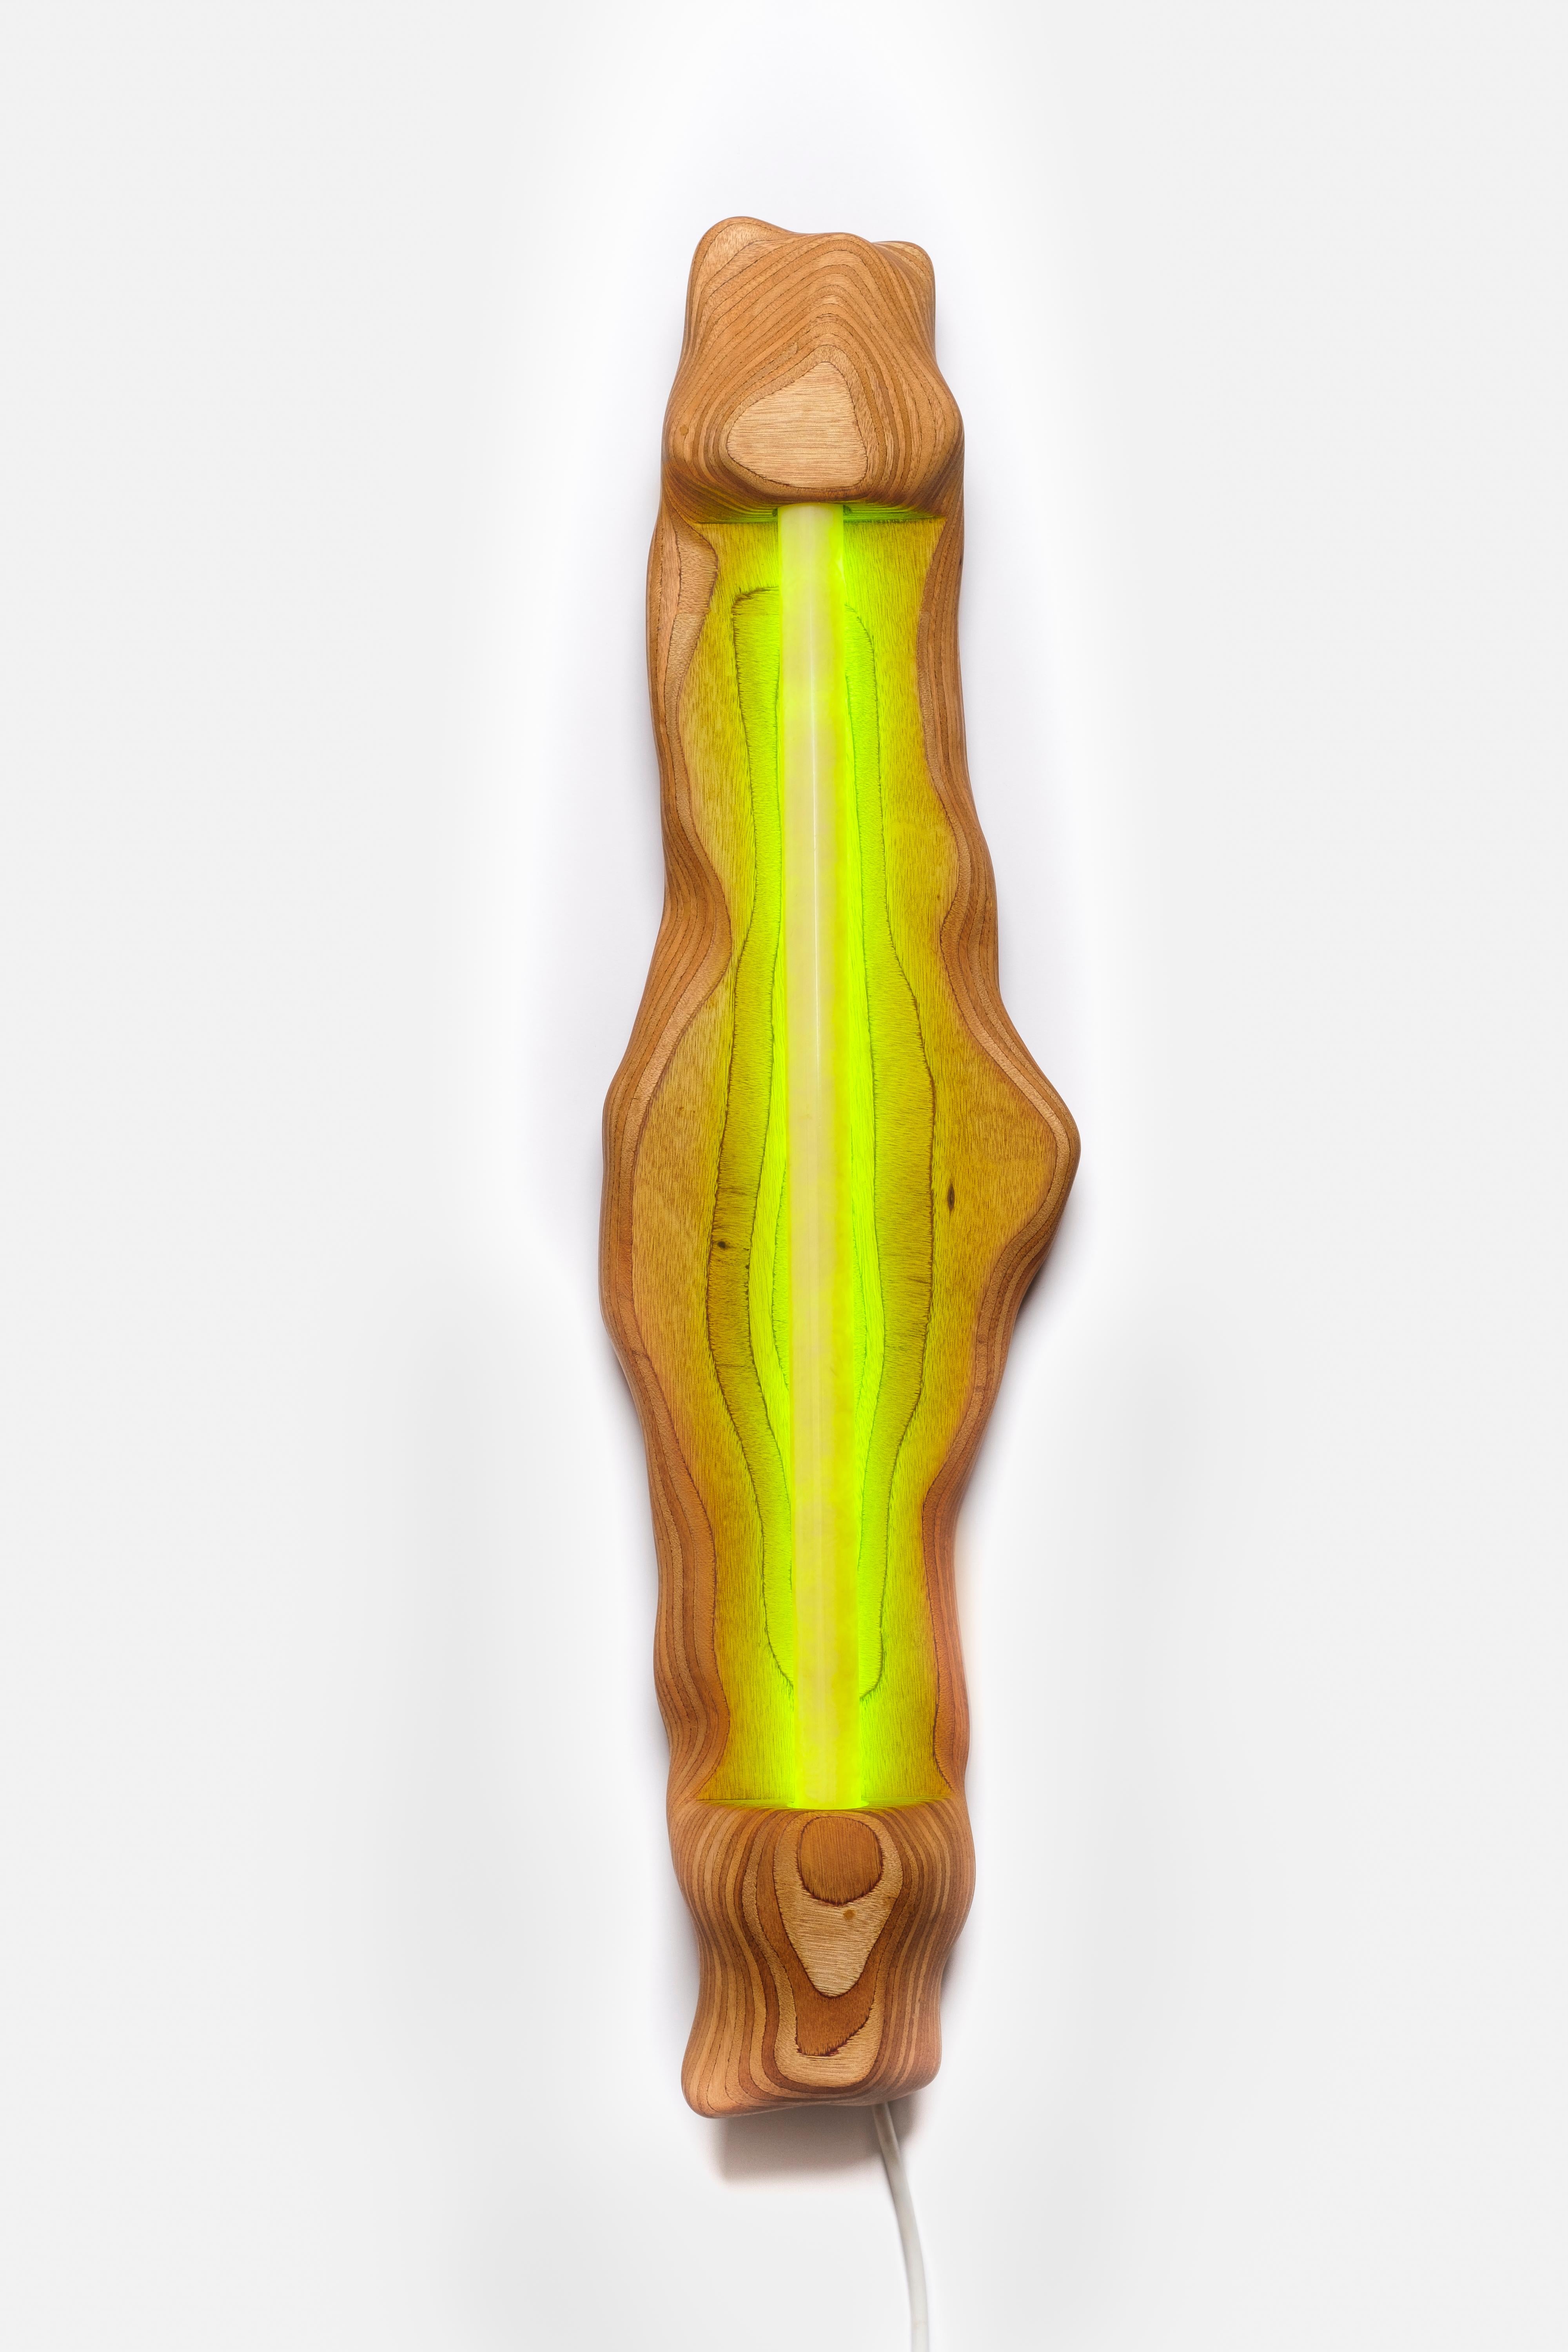 Other Wall Light of Okoume Wood and Neon. by Studio Gert Wessels For Sale